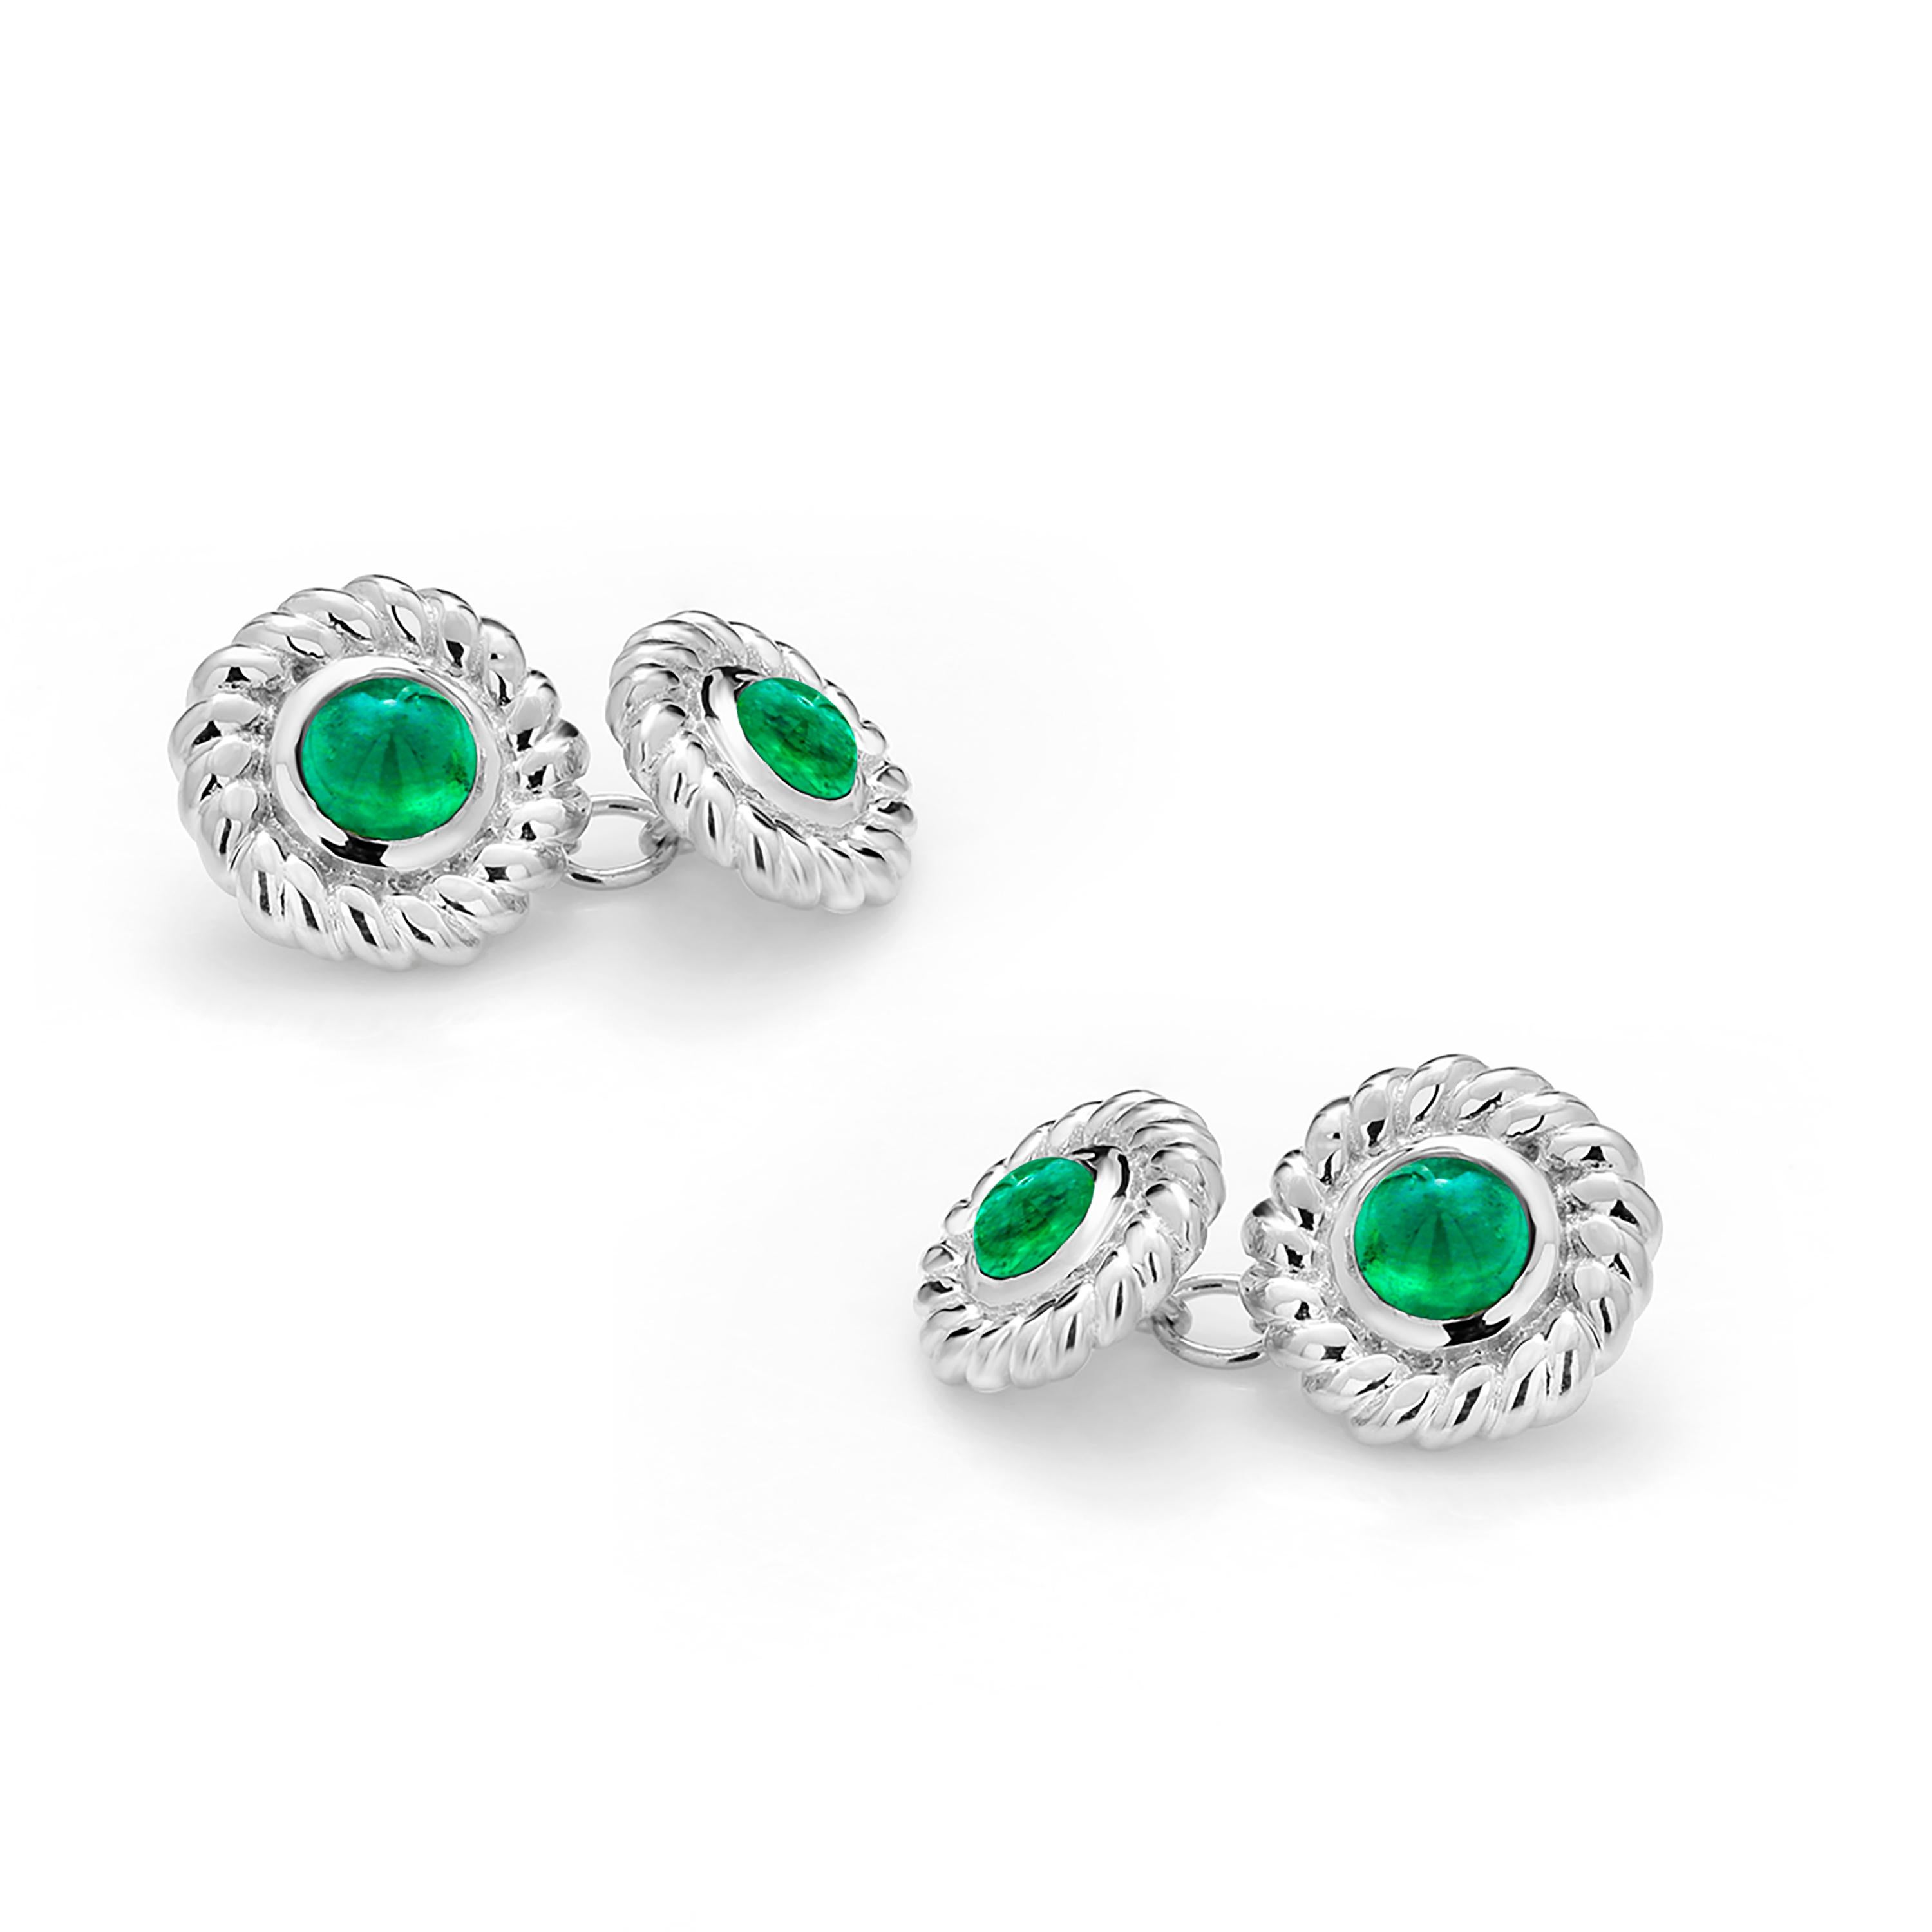 Fourteen karats white gold fabulous pair of matched men’s double-sided chain link cufflinks
Four matching vibrant and vivid cabochon green emeralds weighing 2.55 carats
The emeralds hue color is of full-bodied grass gree  tone 
Chain Link measures